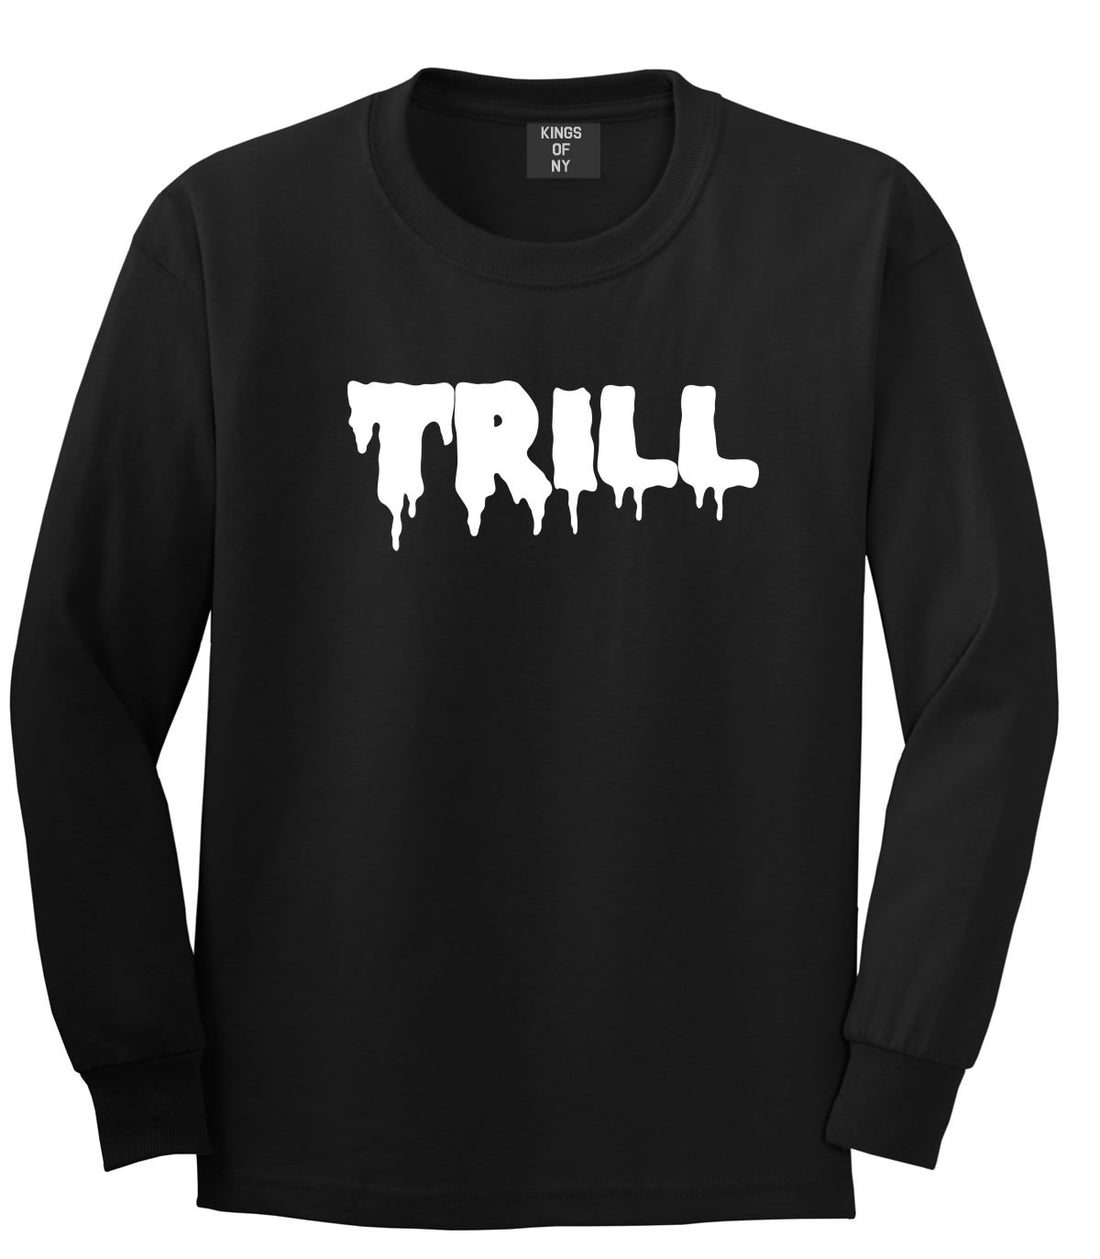 Trill Blood New York Bx Been Style Fashion Long Sleeve Boys Kids T-Shirt In Black by Kings Of NY